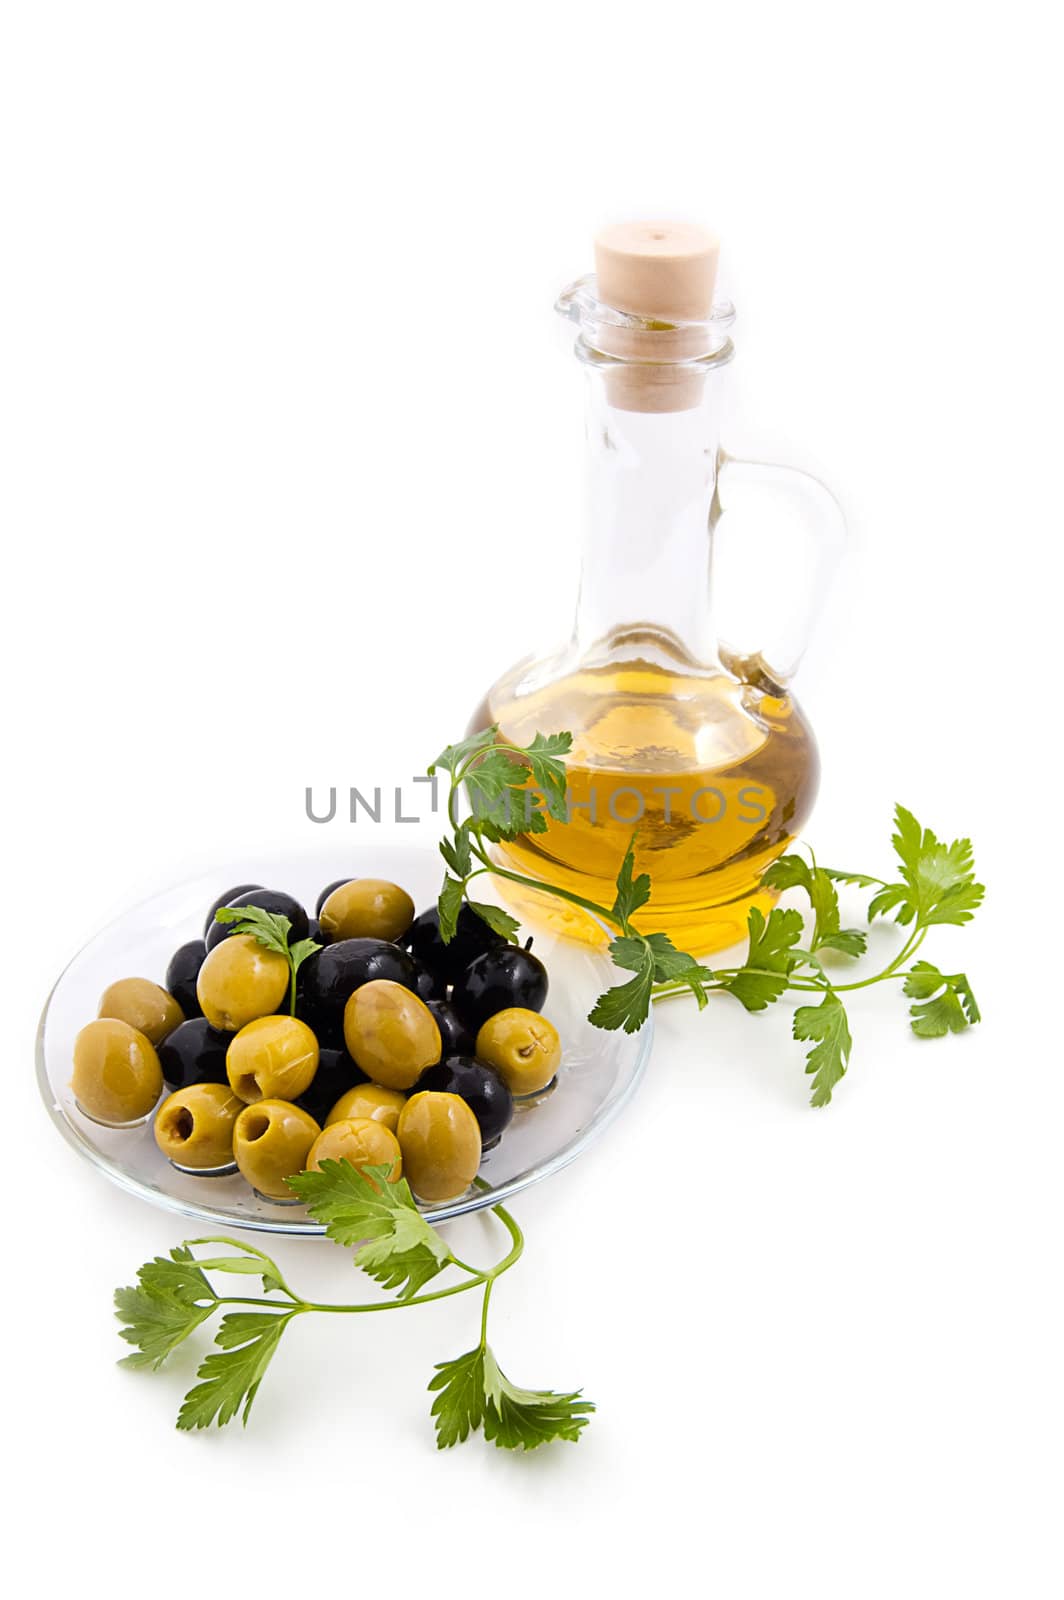 Olive oil by Angel_a